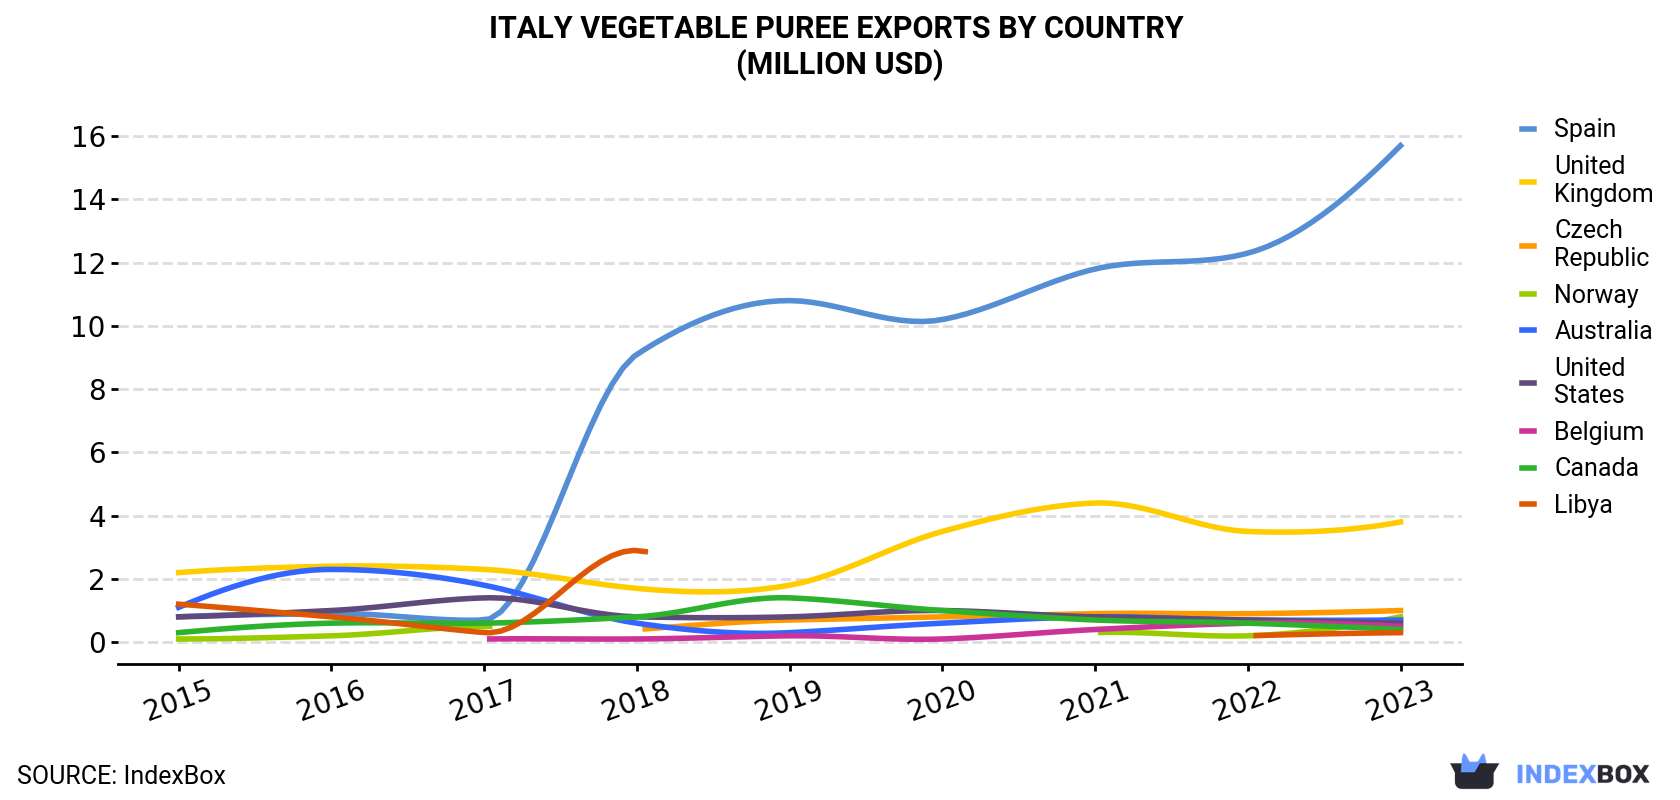 Italy Vegetable Puree Exports By Country (Million USD)